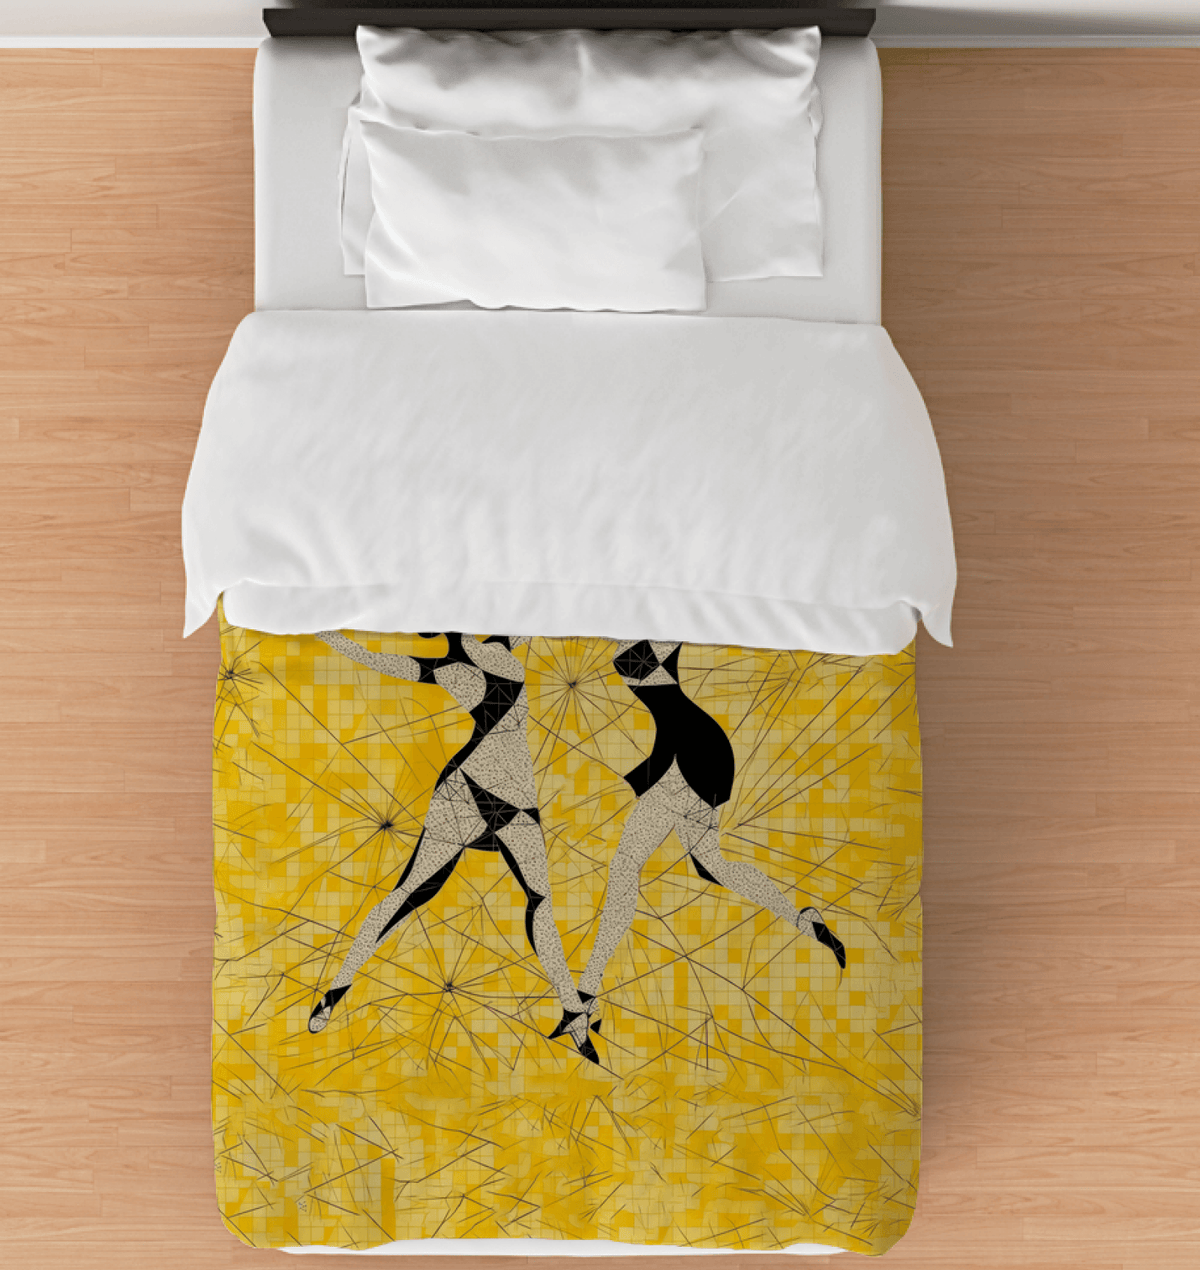 Feminine and energetic dance motif twin-size comforter, ideal for adding a touch of elegance and motivation to any bedroom.